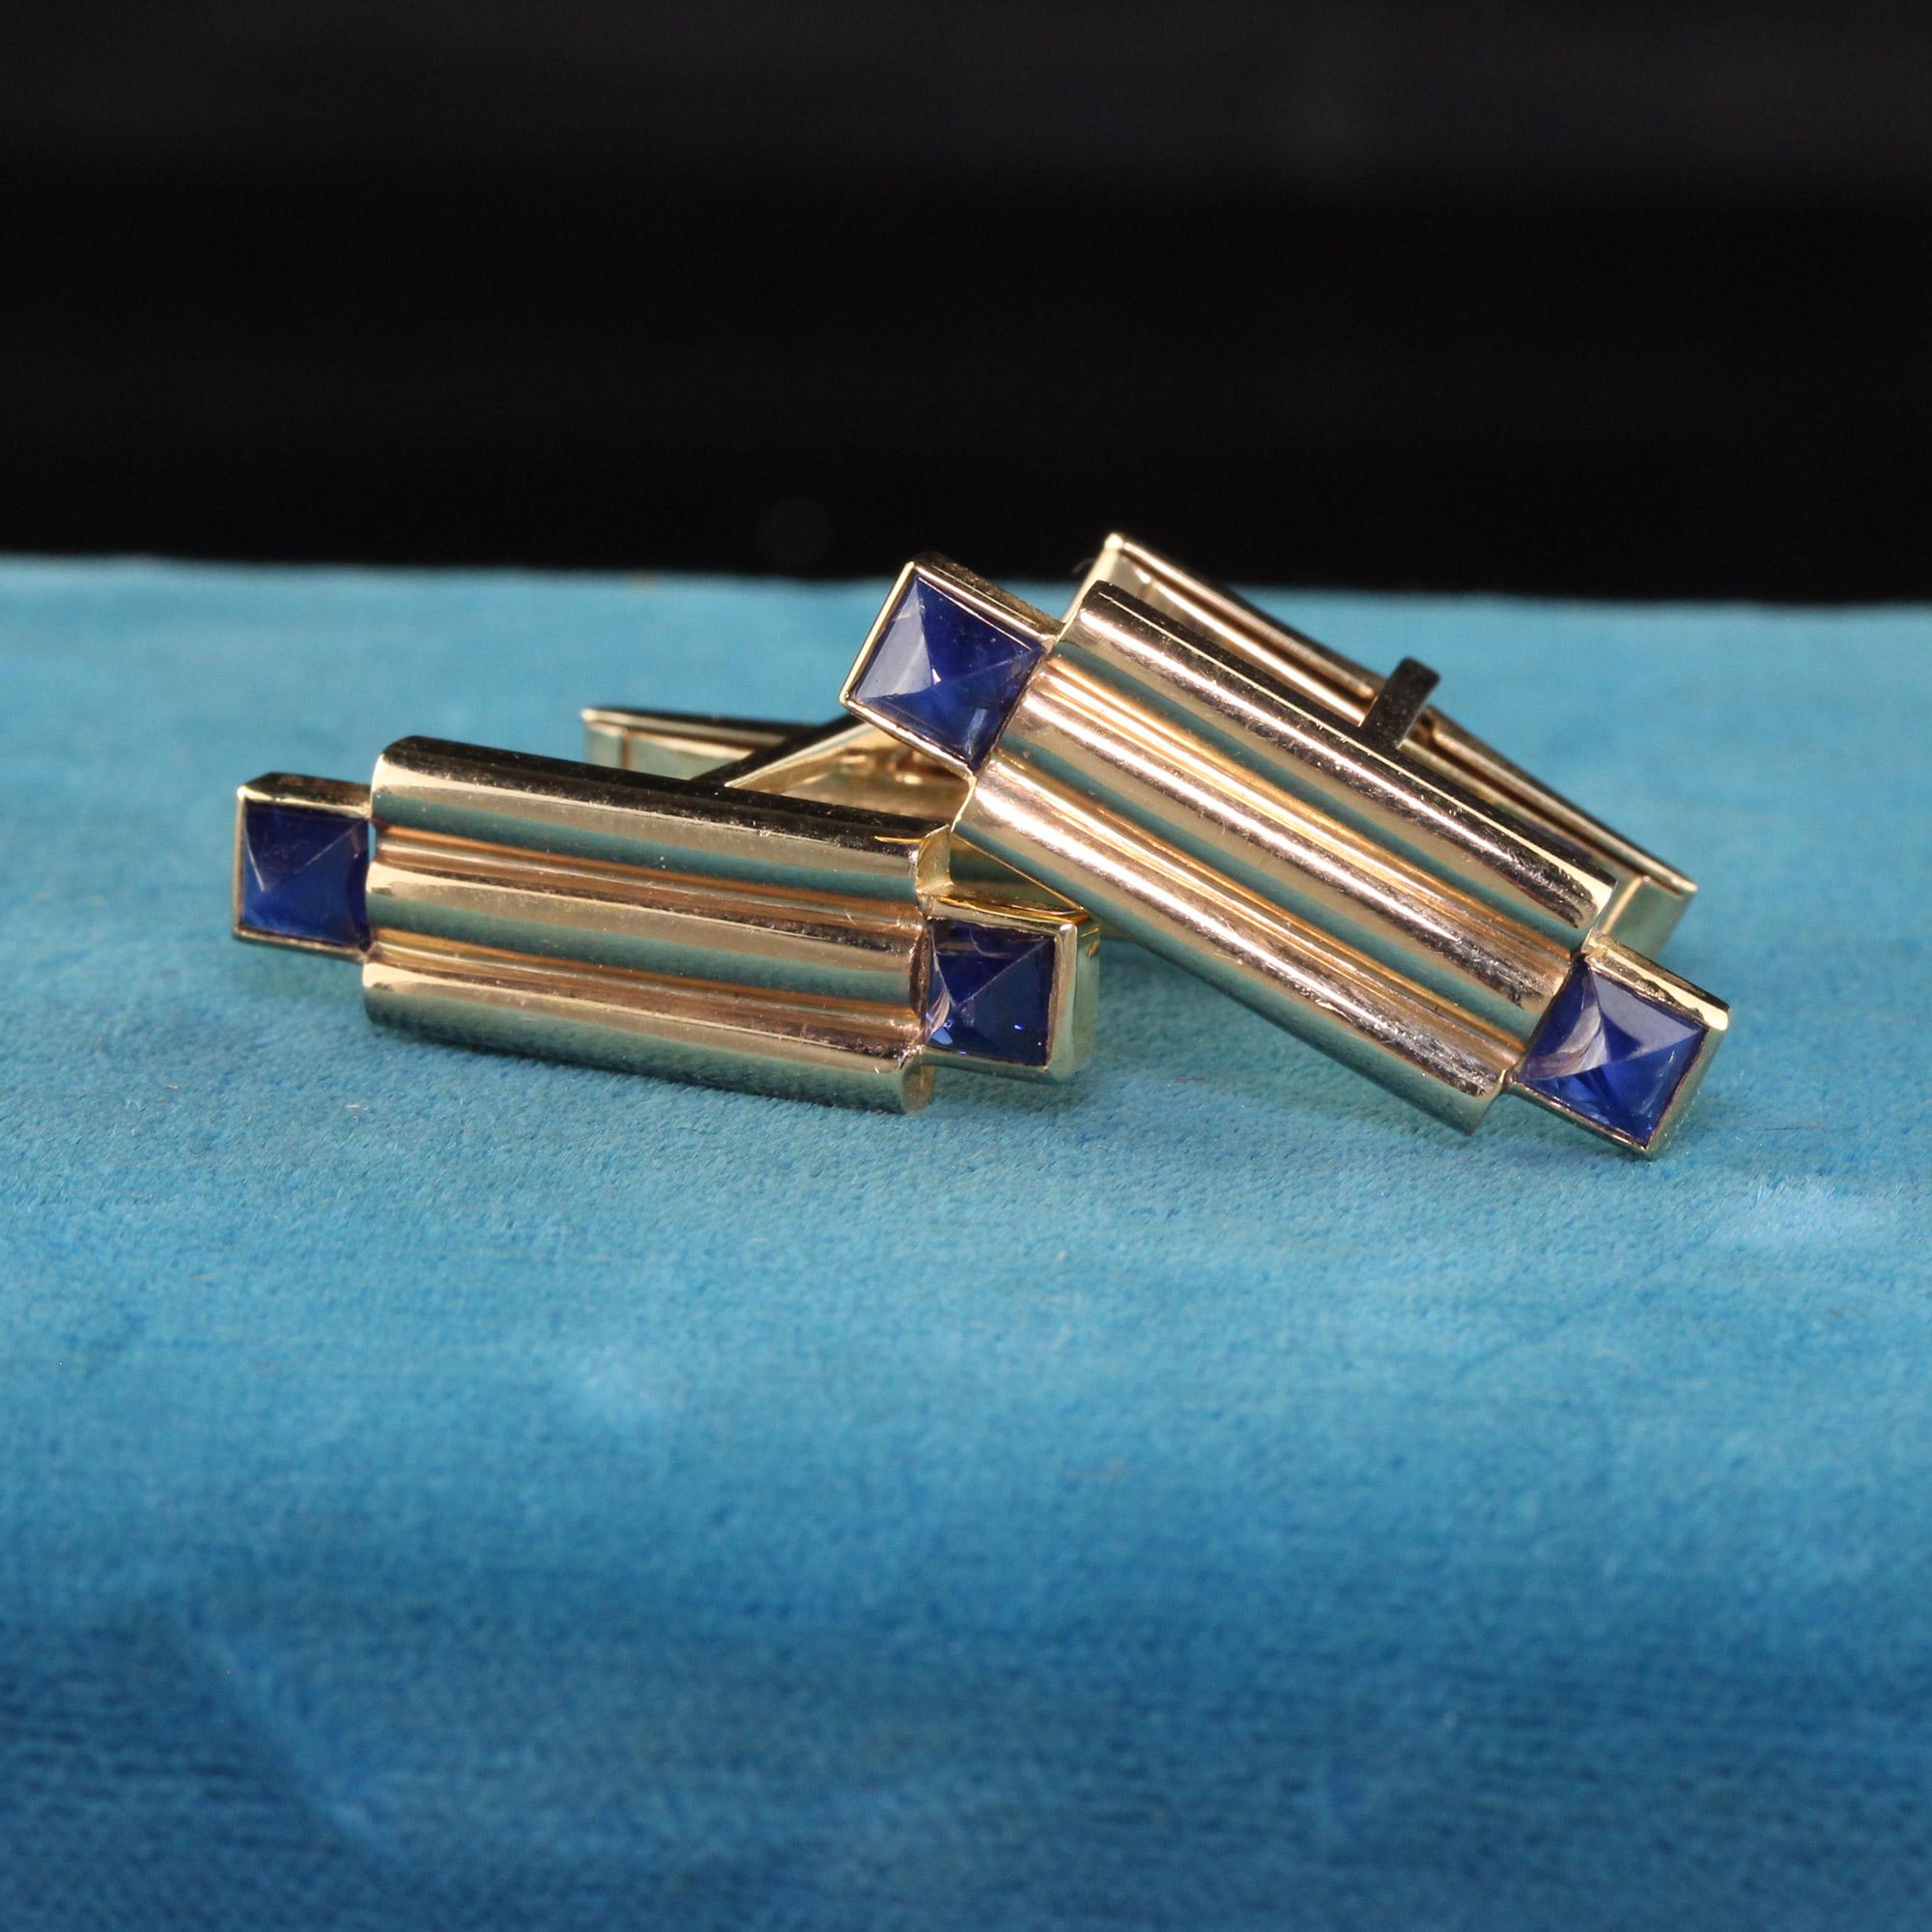 Beautiful Retro 14K Yellow Gold Sugarloaf Sapphire Geometric Cufflinks. These incredible pair of cufflinks are crafted in 14K yellow gold. They have 4 blue sugarloaf cut sapphires set on them and they are in great condition.

Item #C0012

Metal: 14K